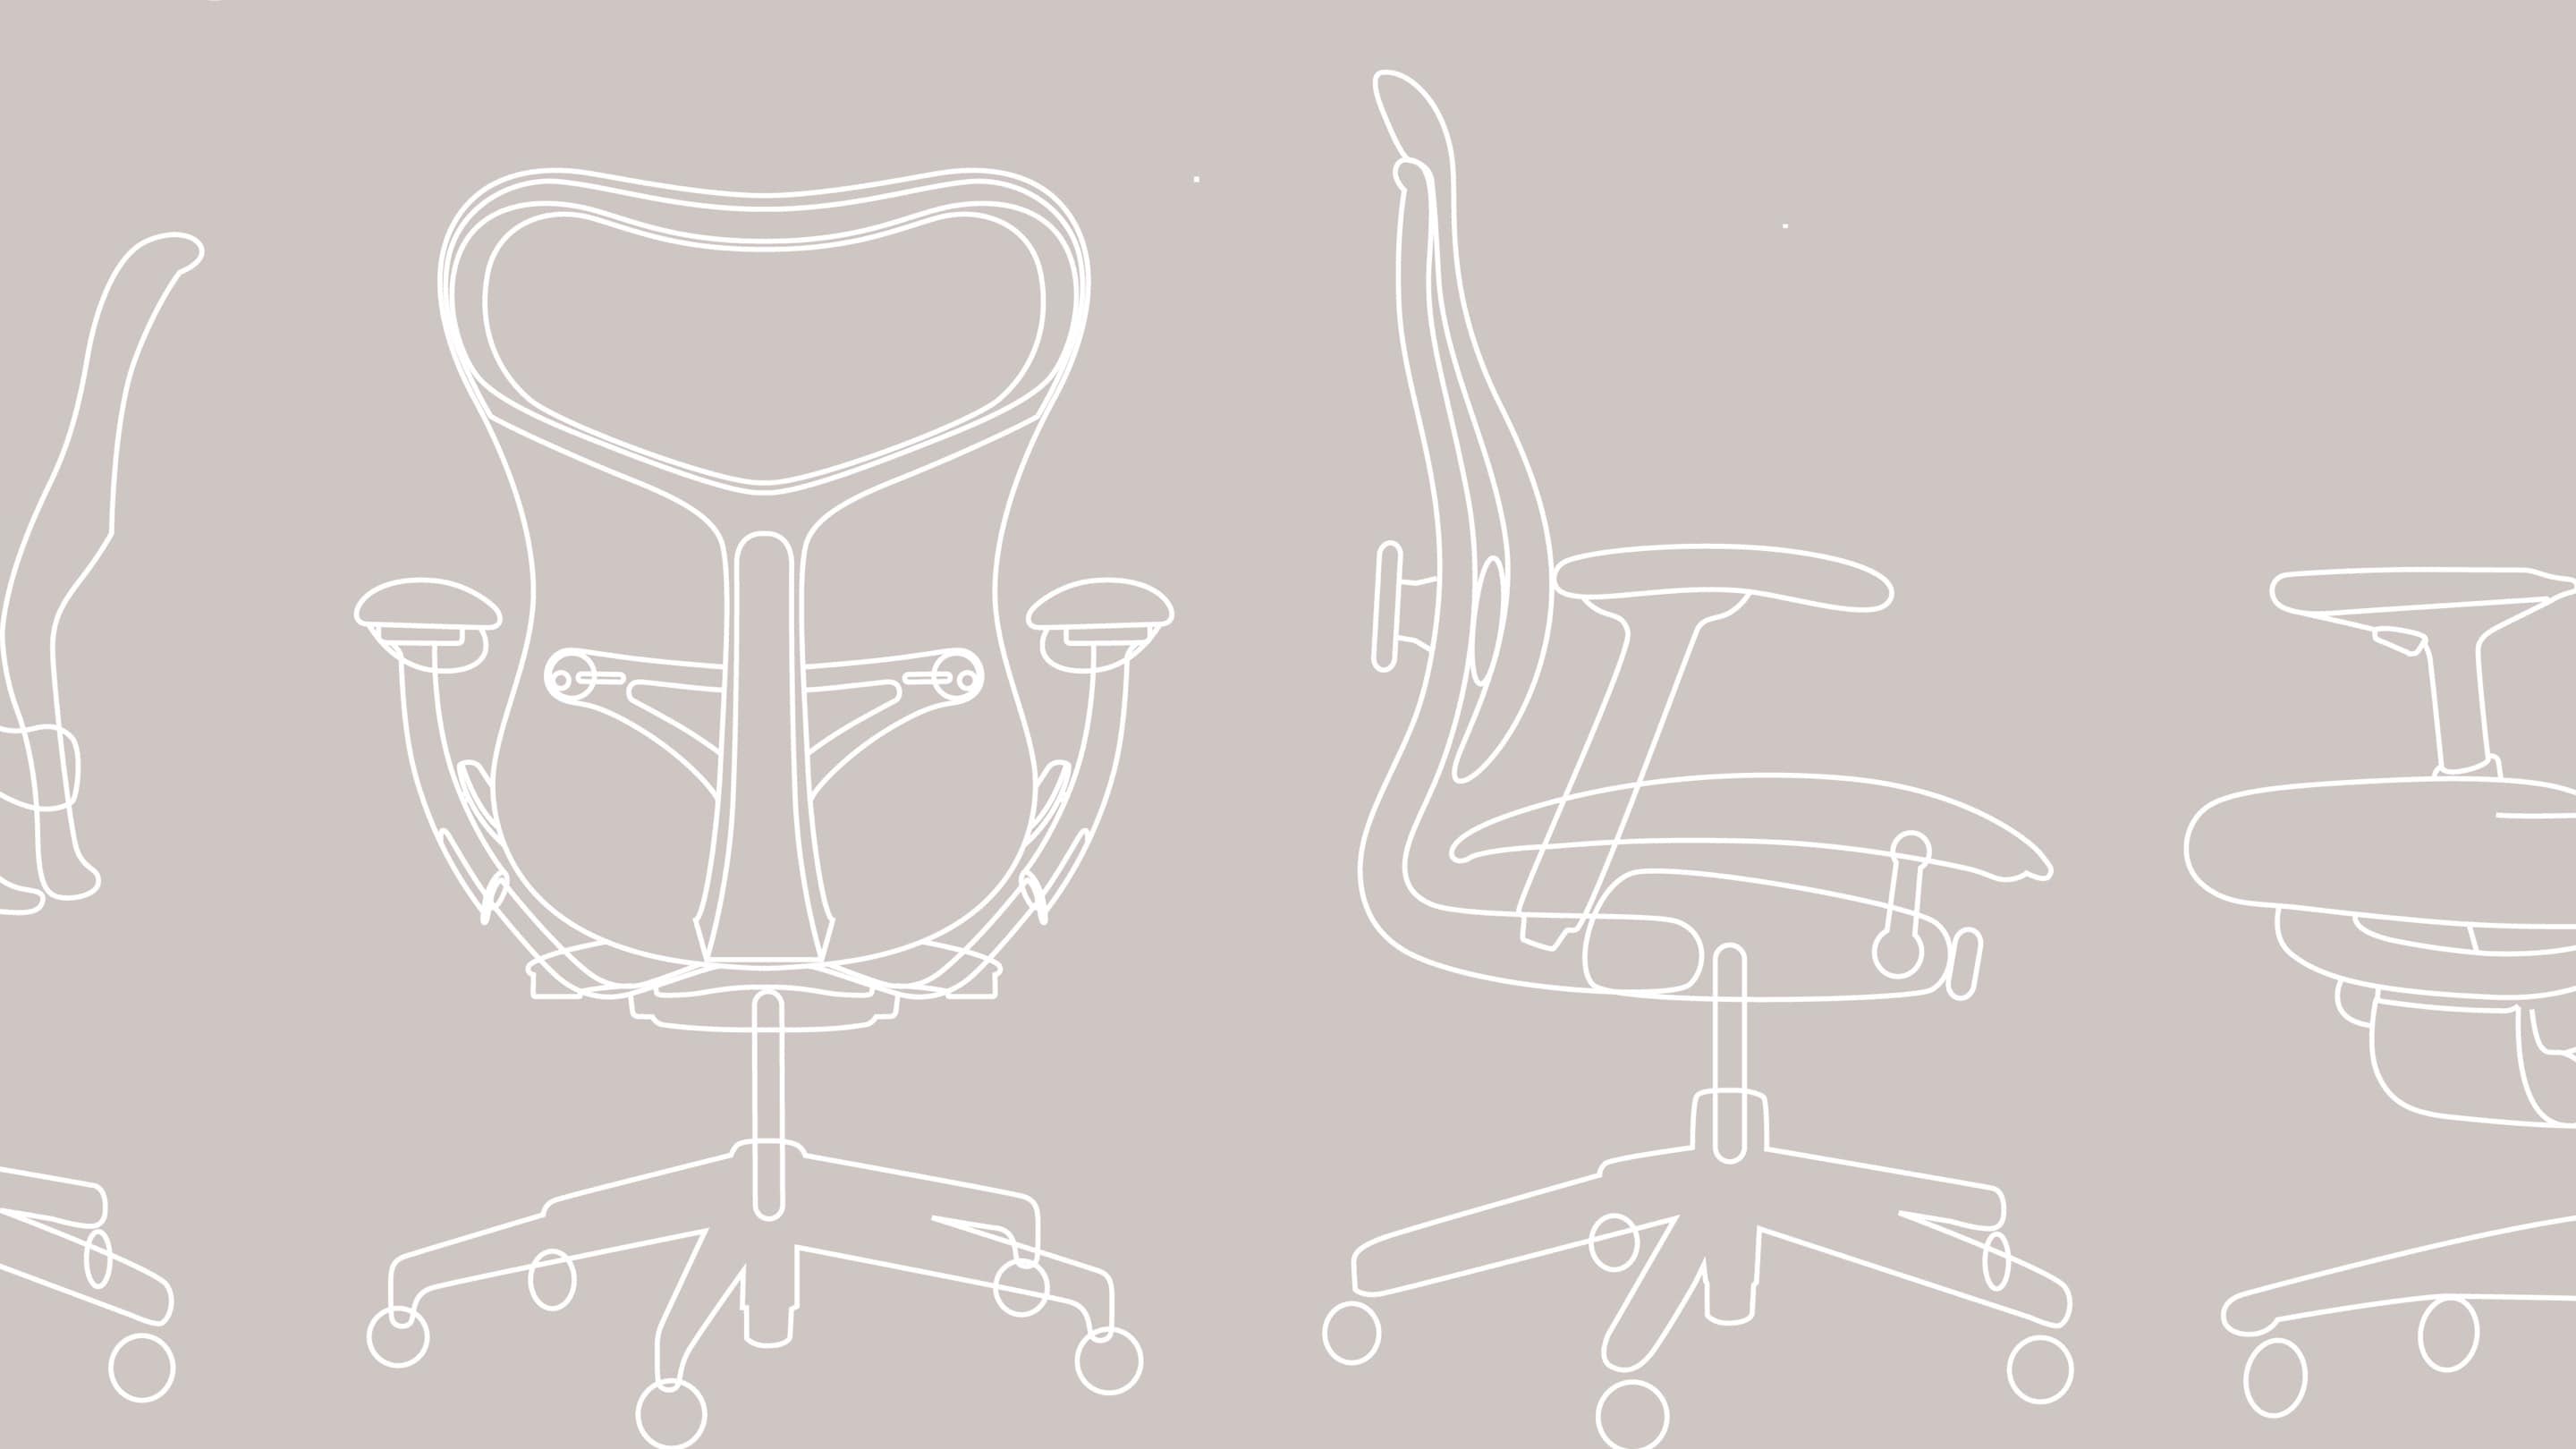 A graphic rendering of an Aeron chair from various angles.